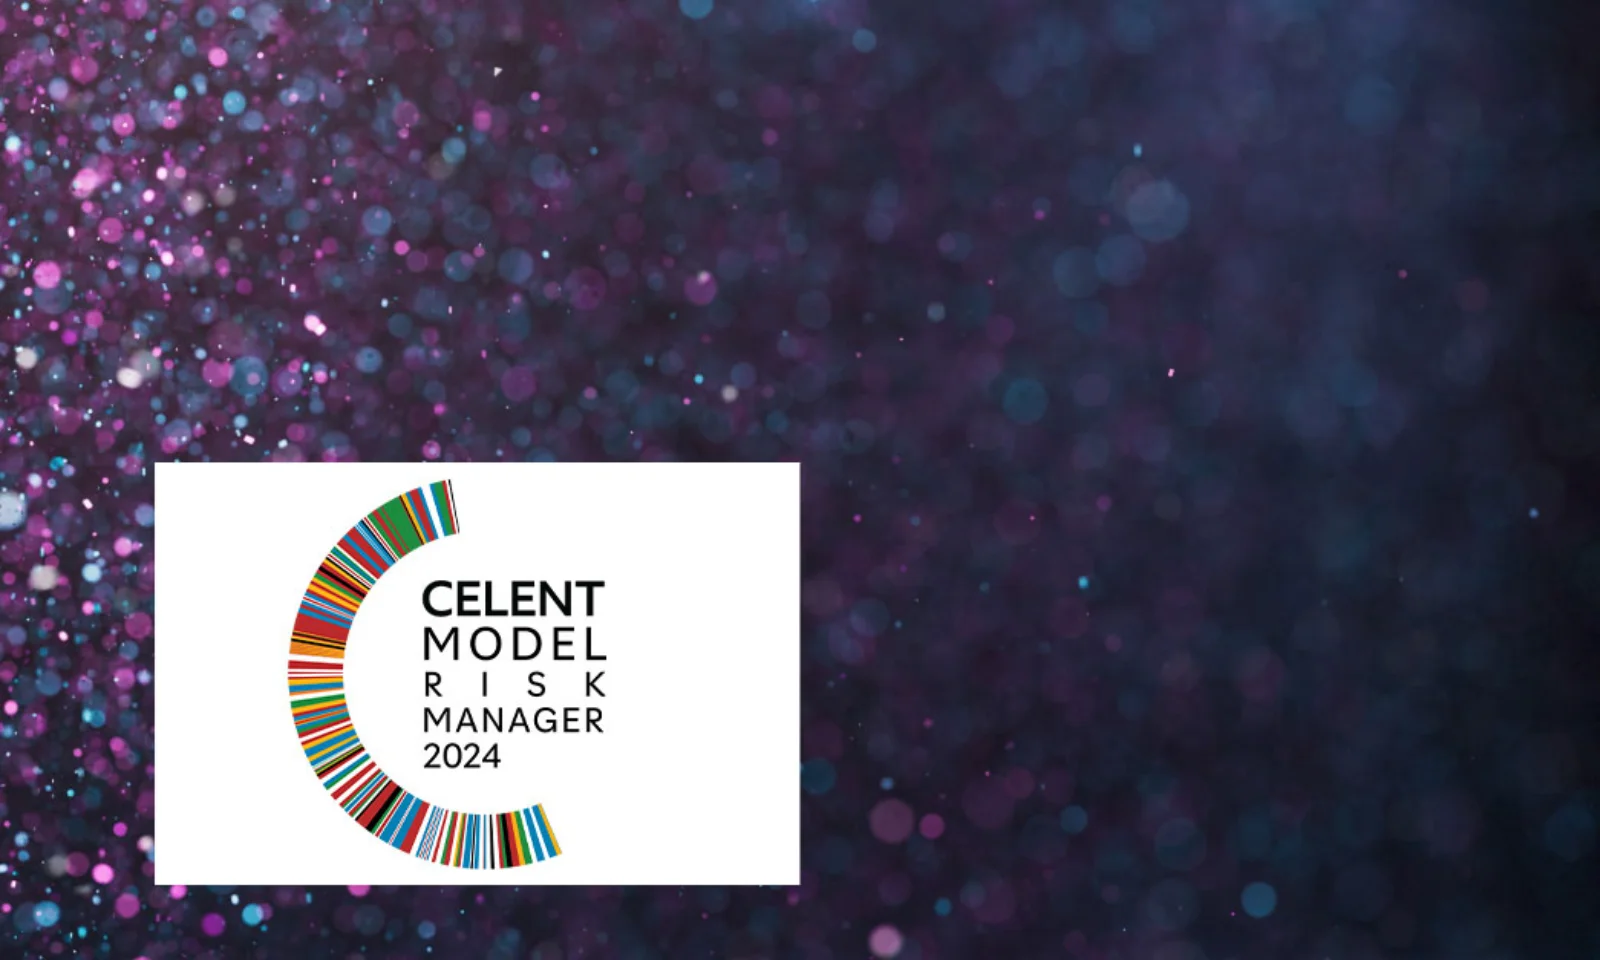 Deutsche Bank has been recognised by Celent as a winner of a Model Risk Manager award